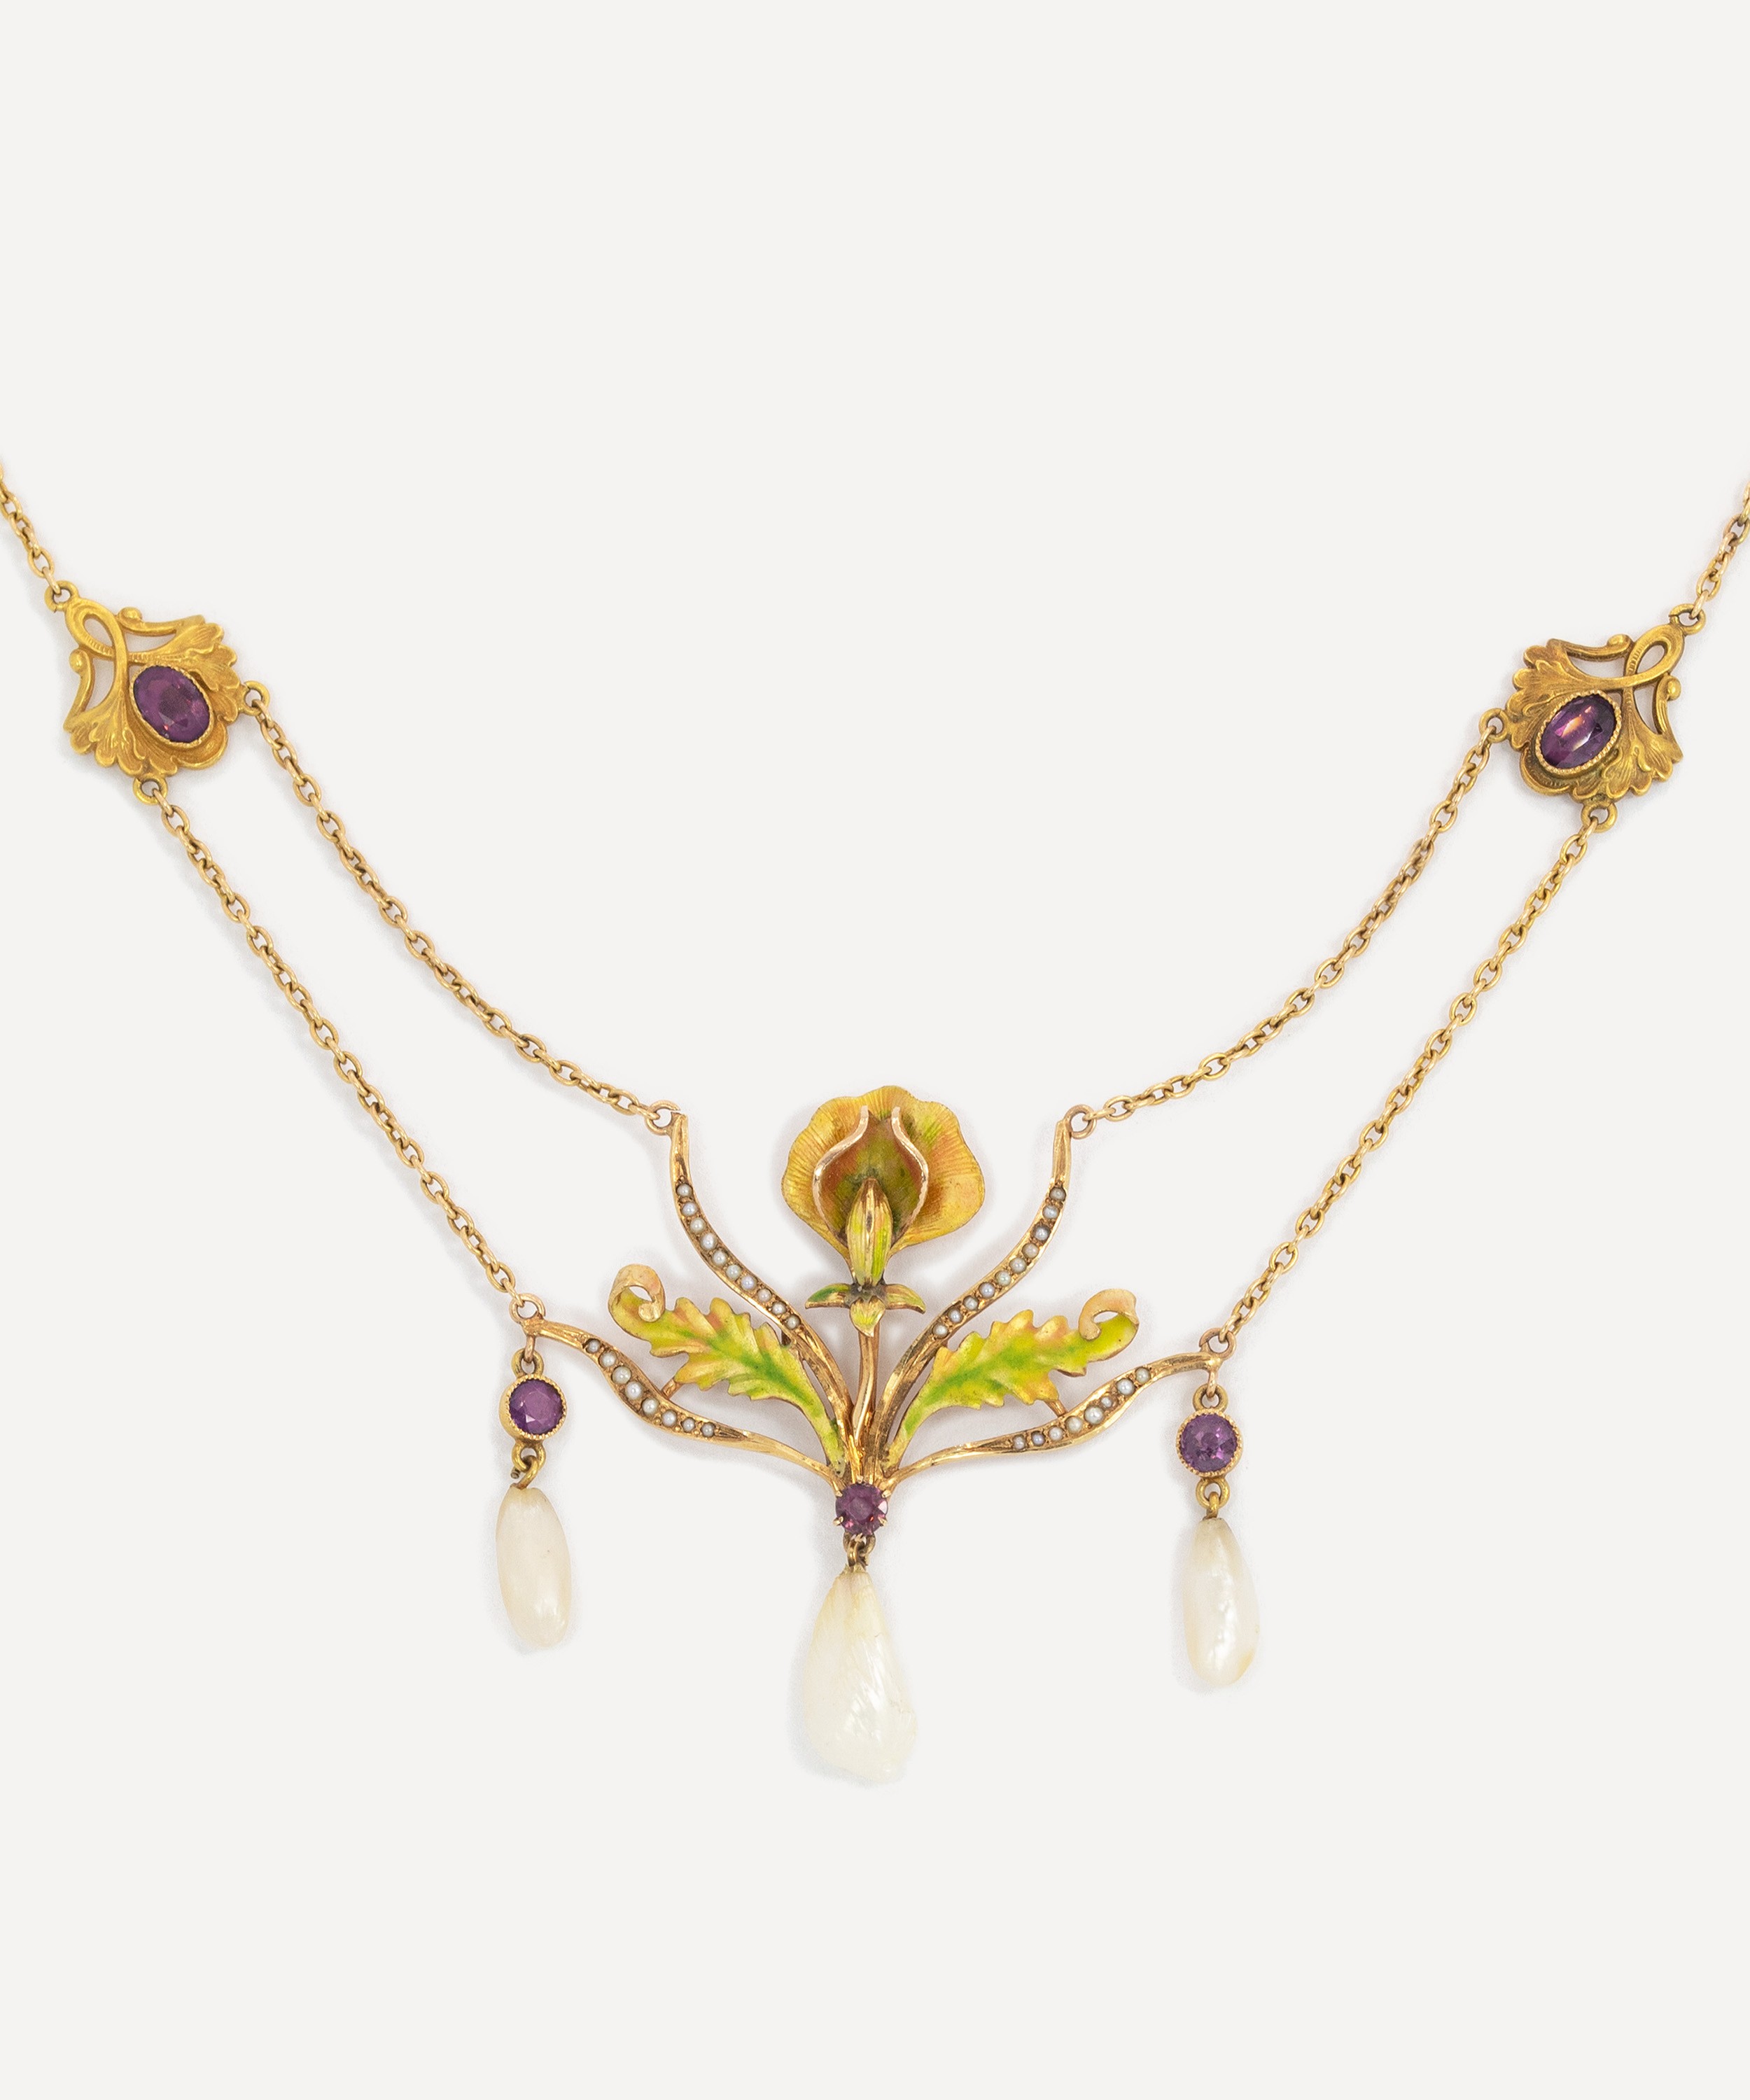 Kojis - 14ct Gold Art Nouveau Pearl and Amethyst Necklace